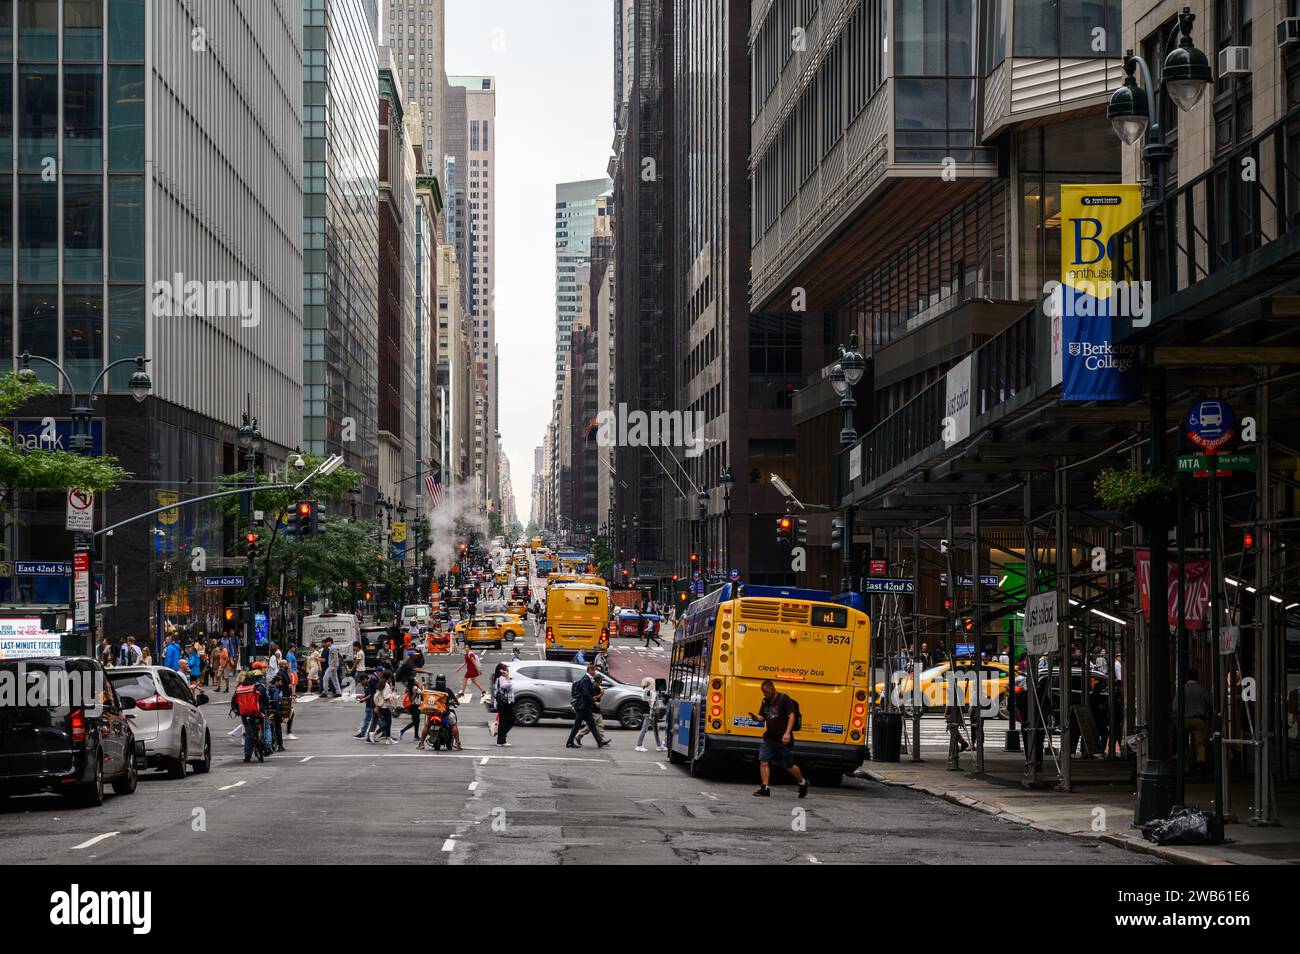 Cloudy summer afternoon on a main avenue in New York, USA. Stock Photo